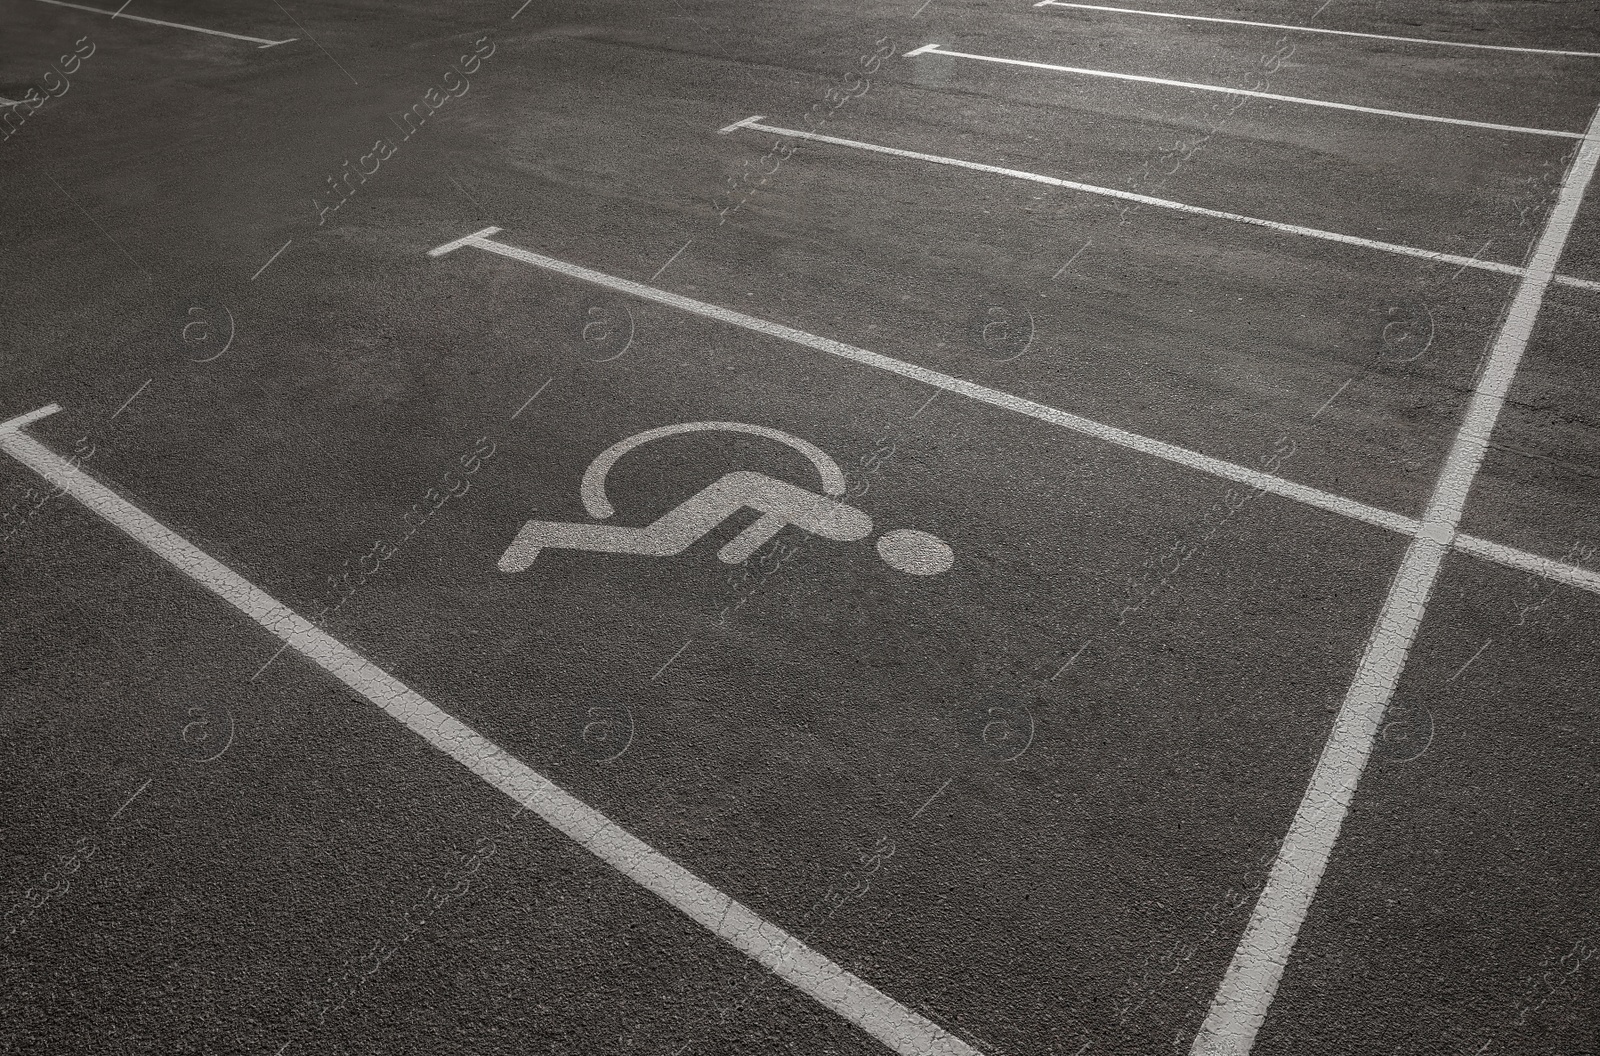 Image of Car parking lot with white marking lines and wheelchair symbol  